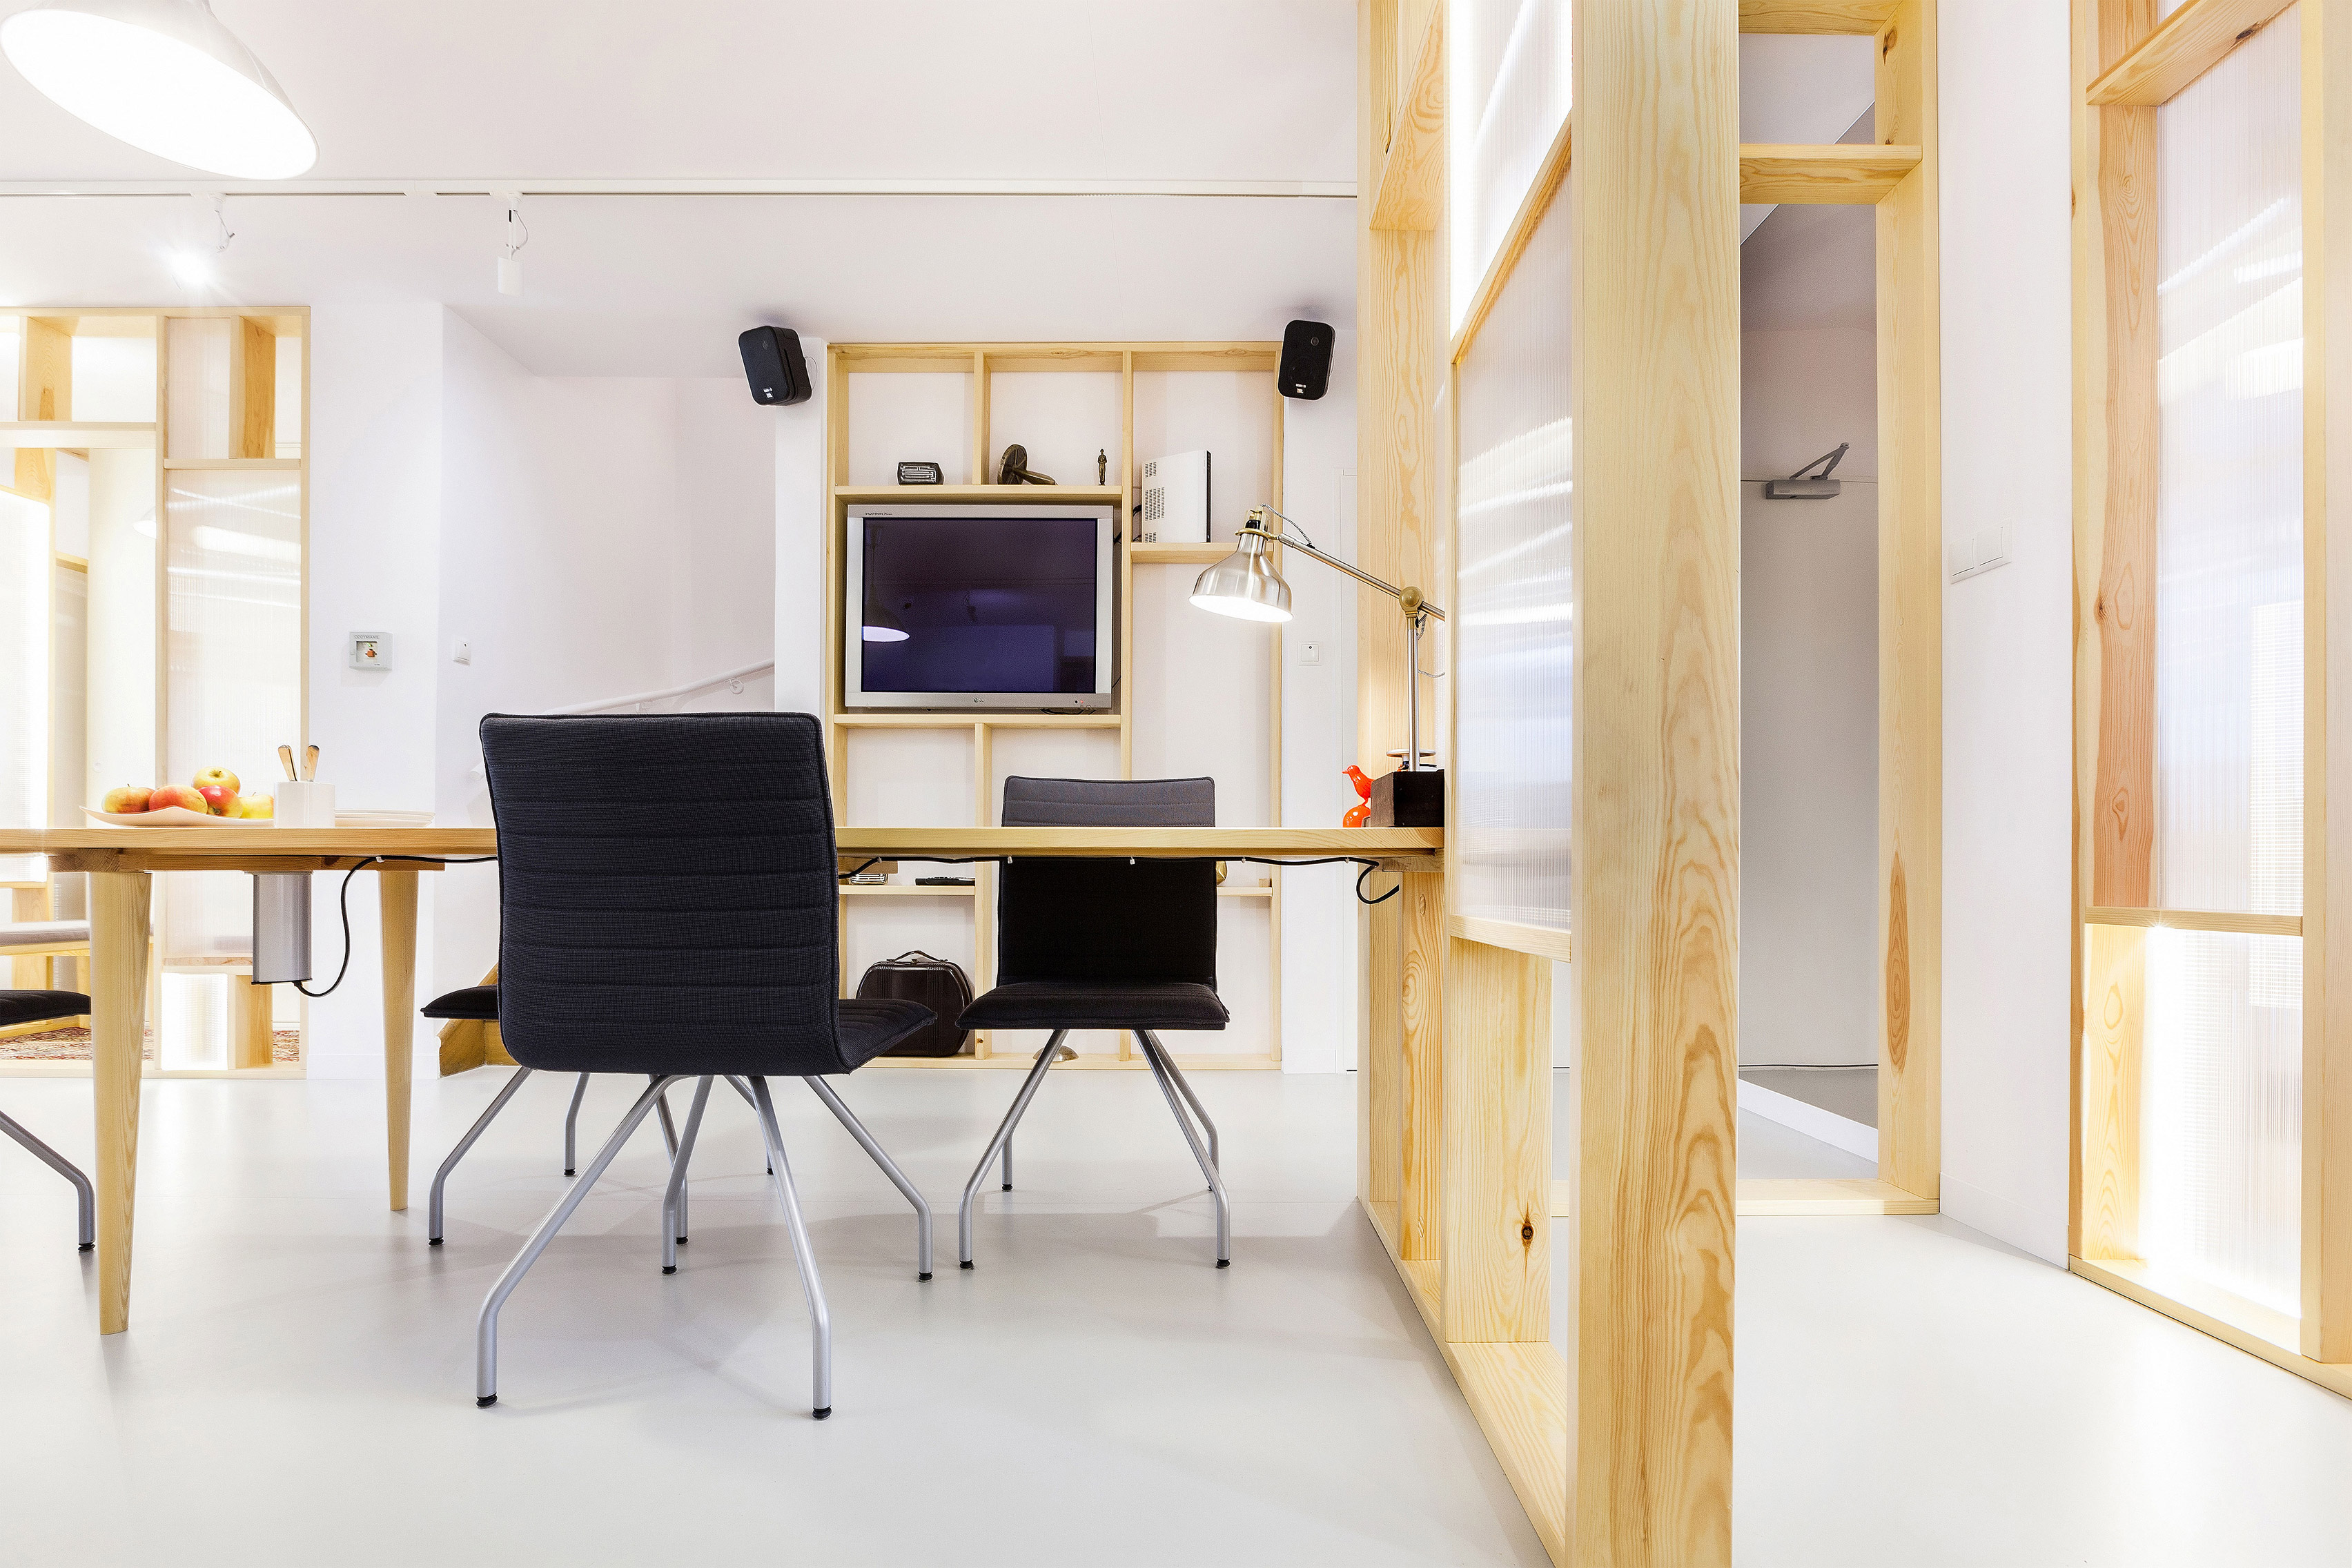 Economical workspace renovation in Warsaw by MFRMGR features semi-transparent walls